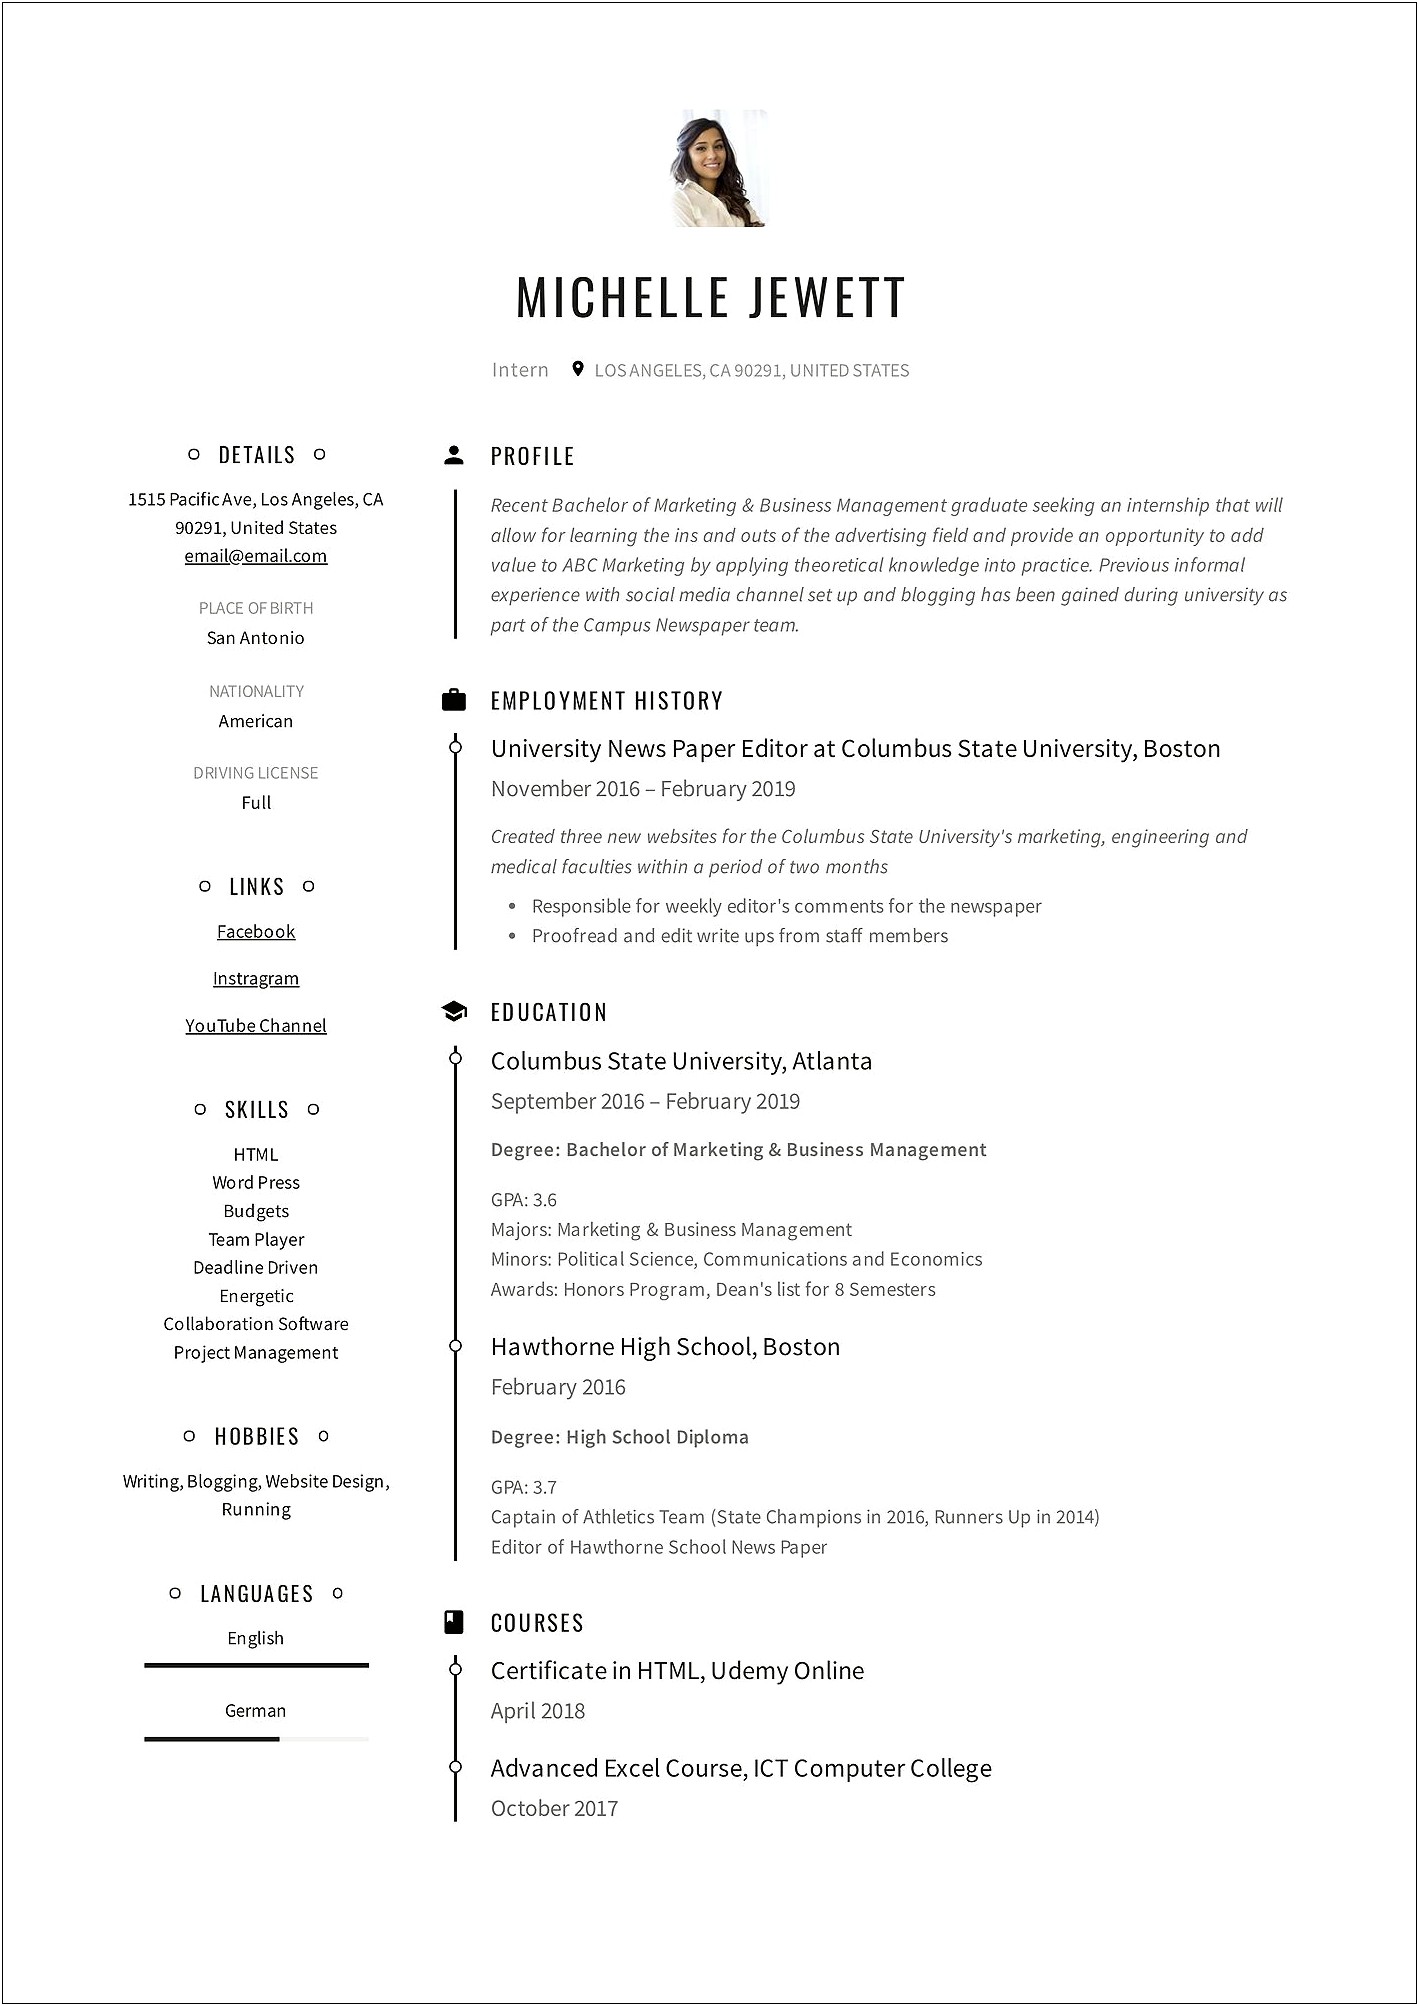 Resume Education Section For High School